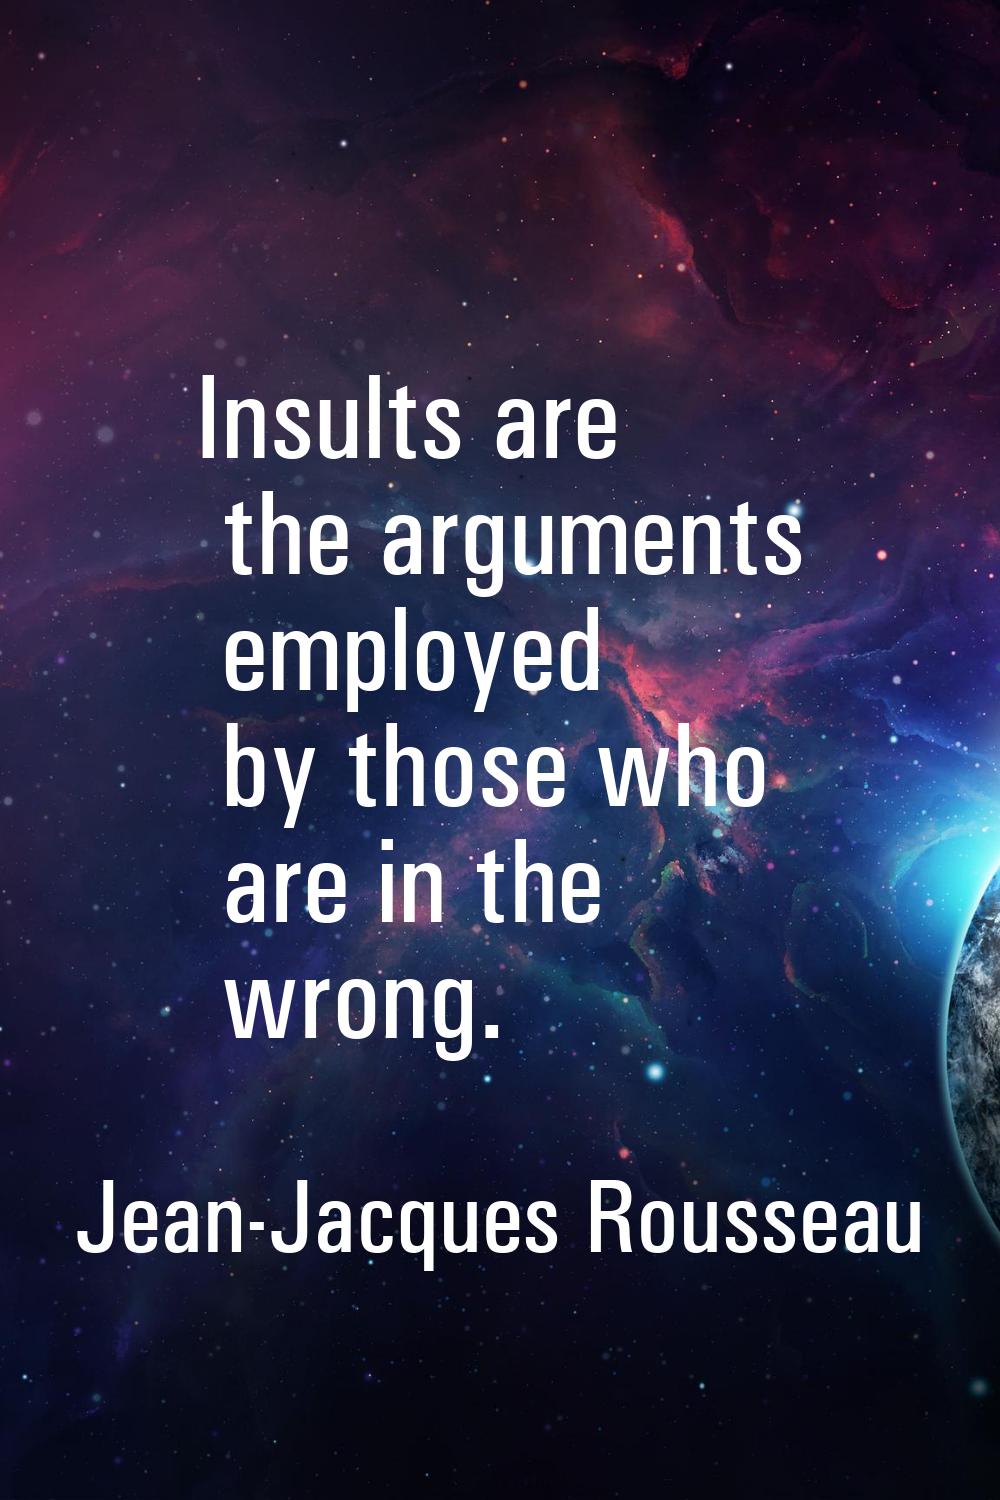 Insults are the arguments employed by those who are in the wrong.